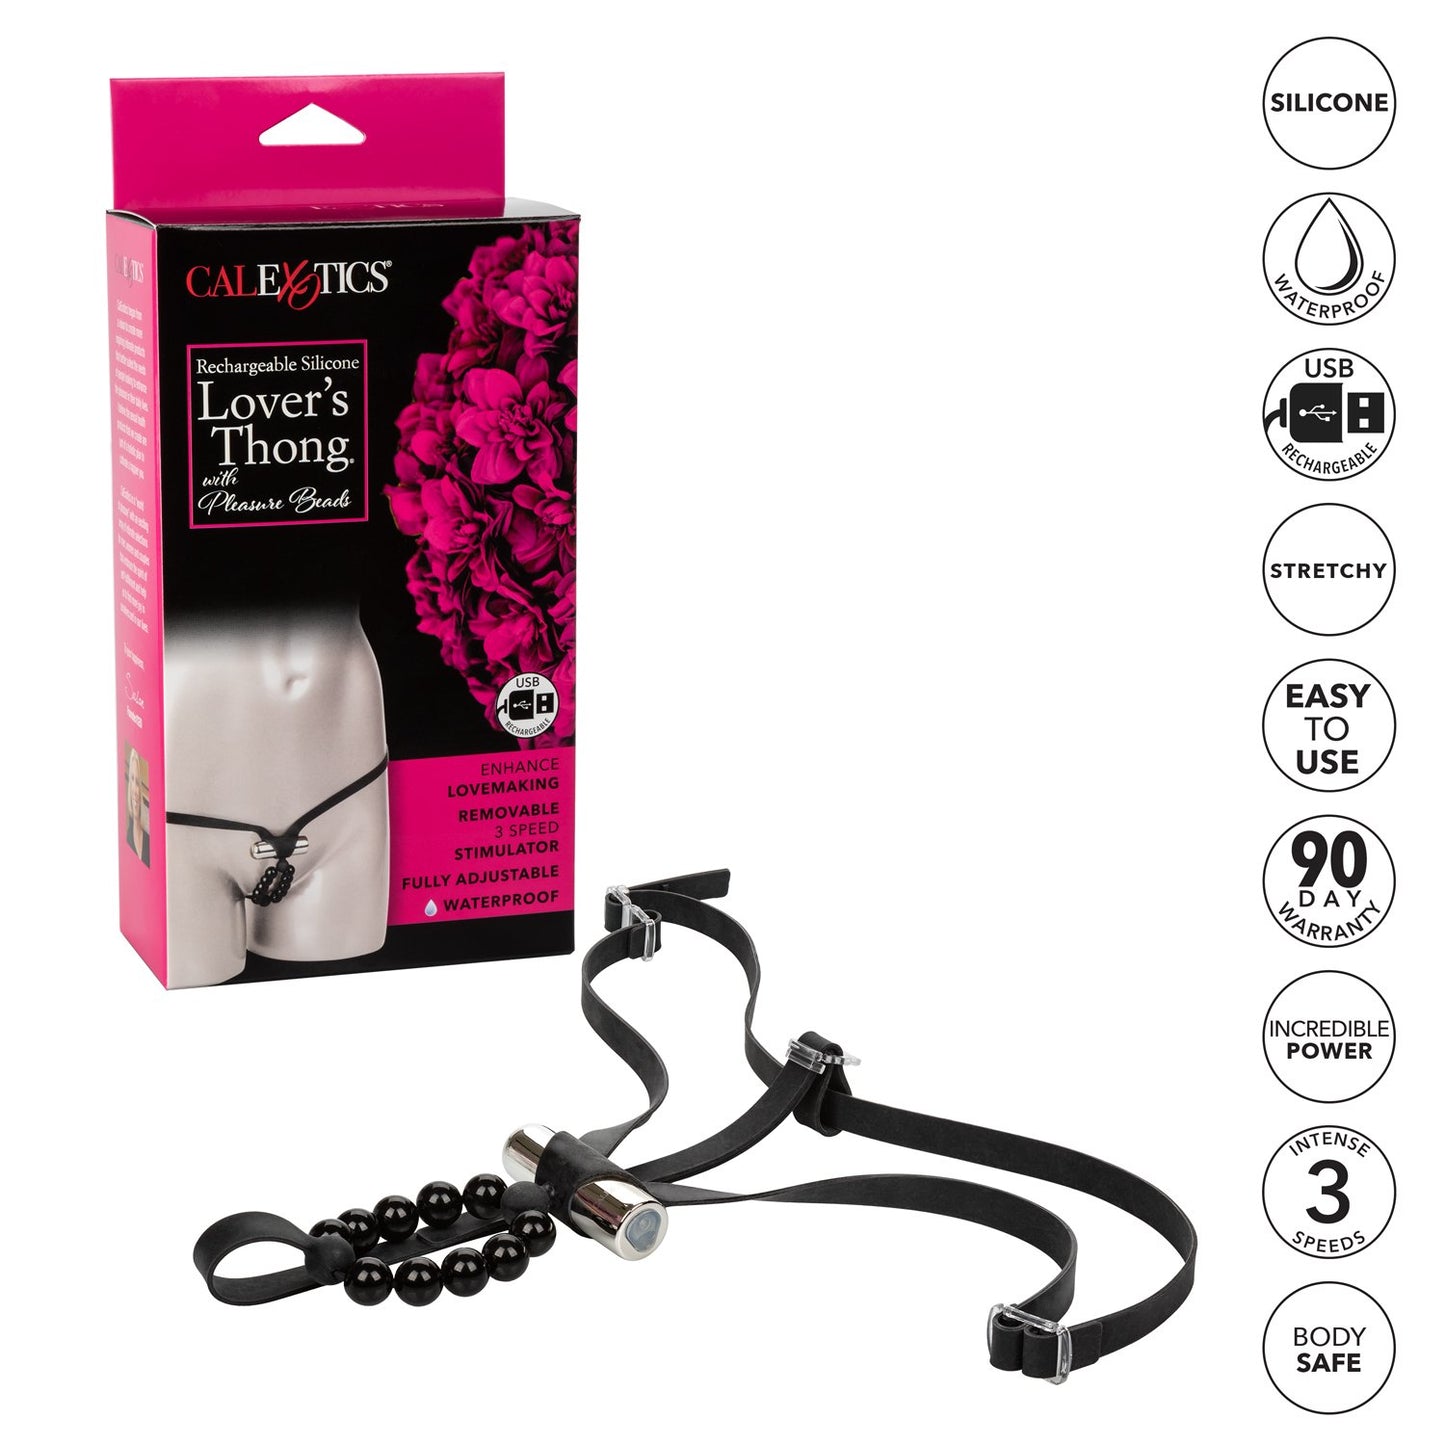 Rechargeable Silicone Lover's Thong with Pleasure Beads